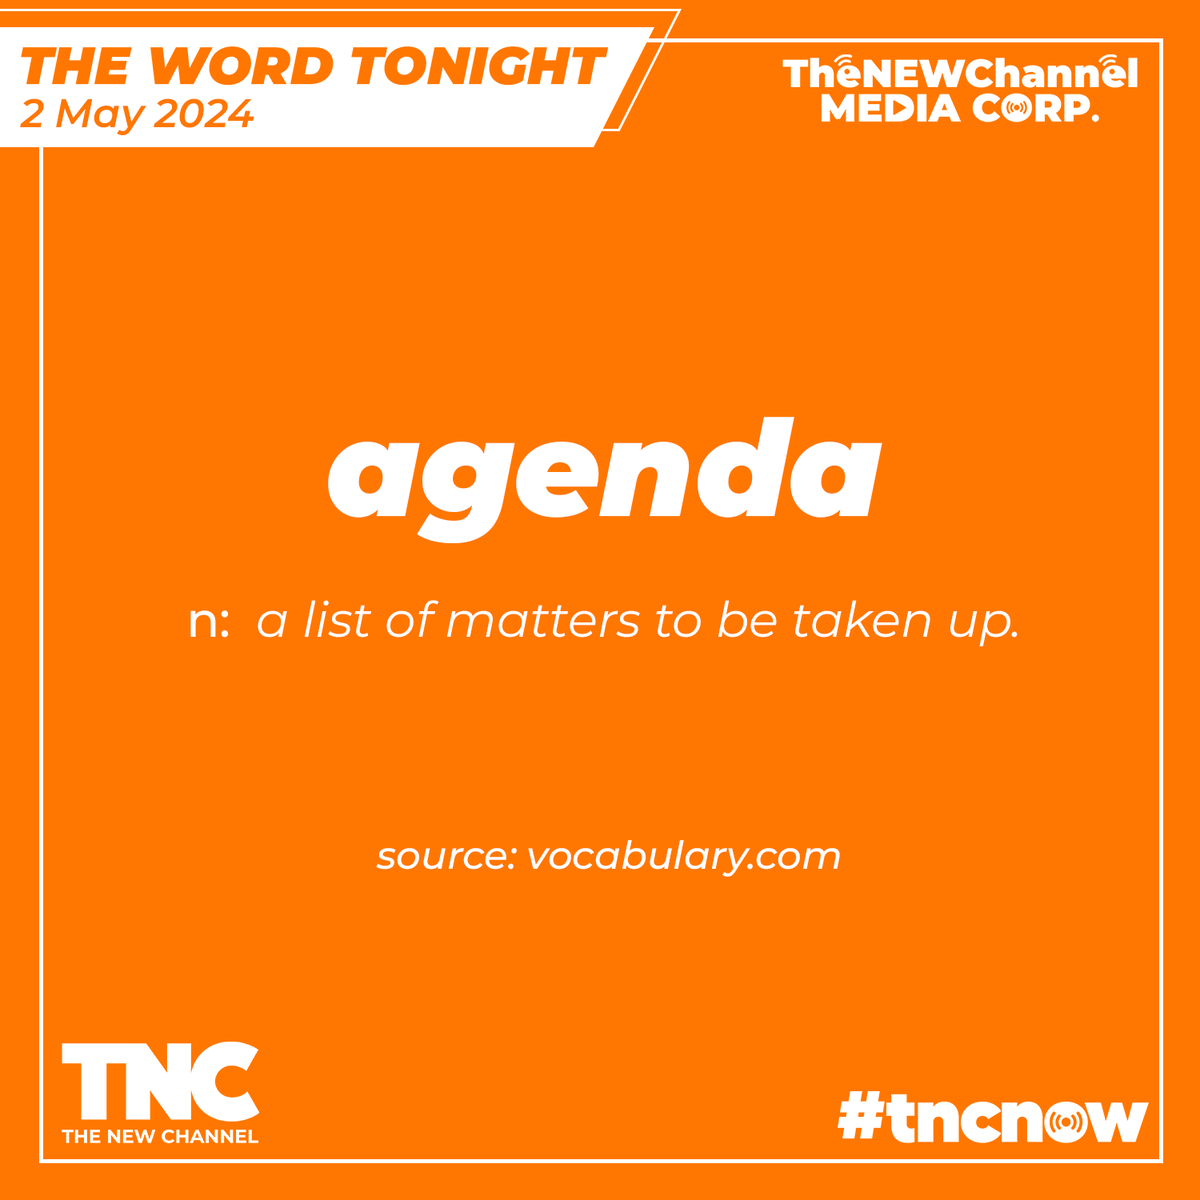 The Word Tonight 2 May 2024 agenda /əˈdʒɛndə/ Noun a list of matters to be taken up Yet the enterprise rarely has the snap of quick-witted improv and uproarious discovery Source: Vocabulary.com